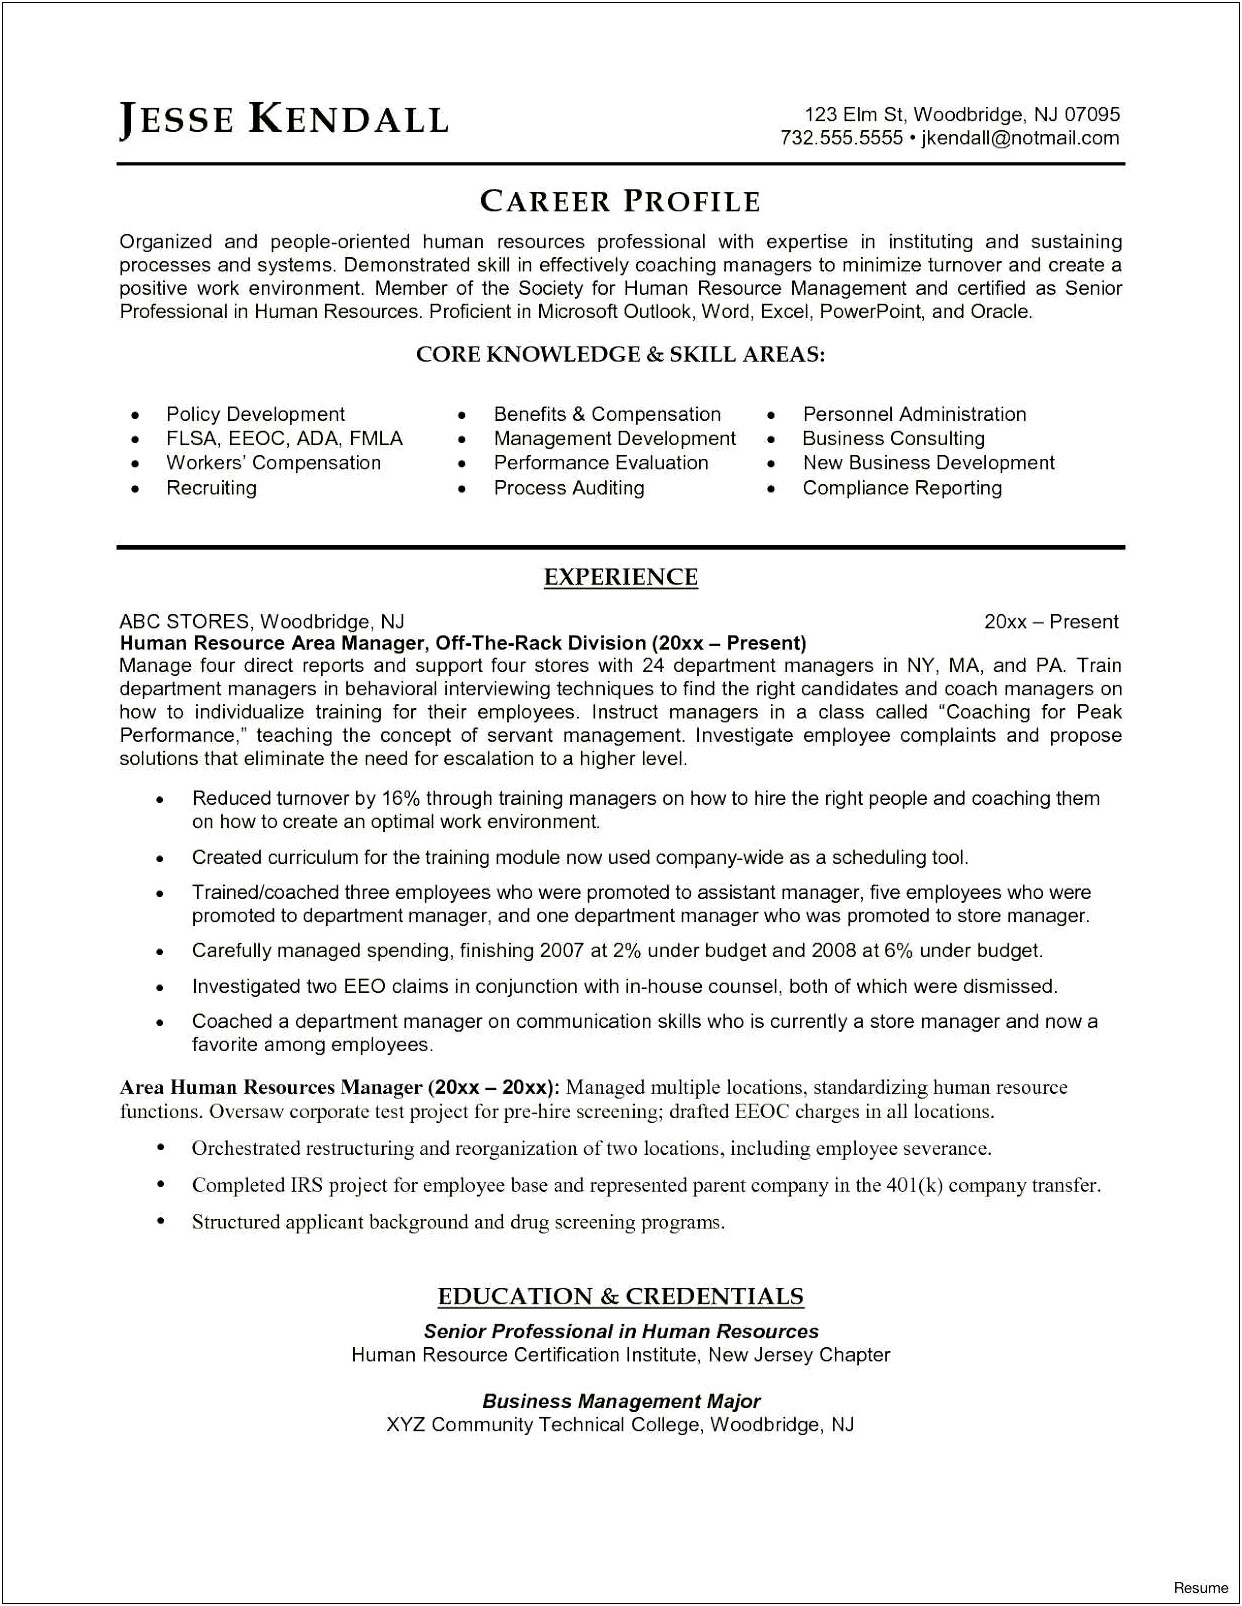 Human Resource Manager Resume Exaamples